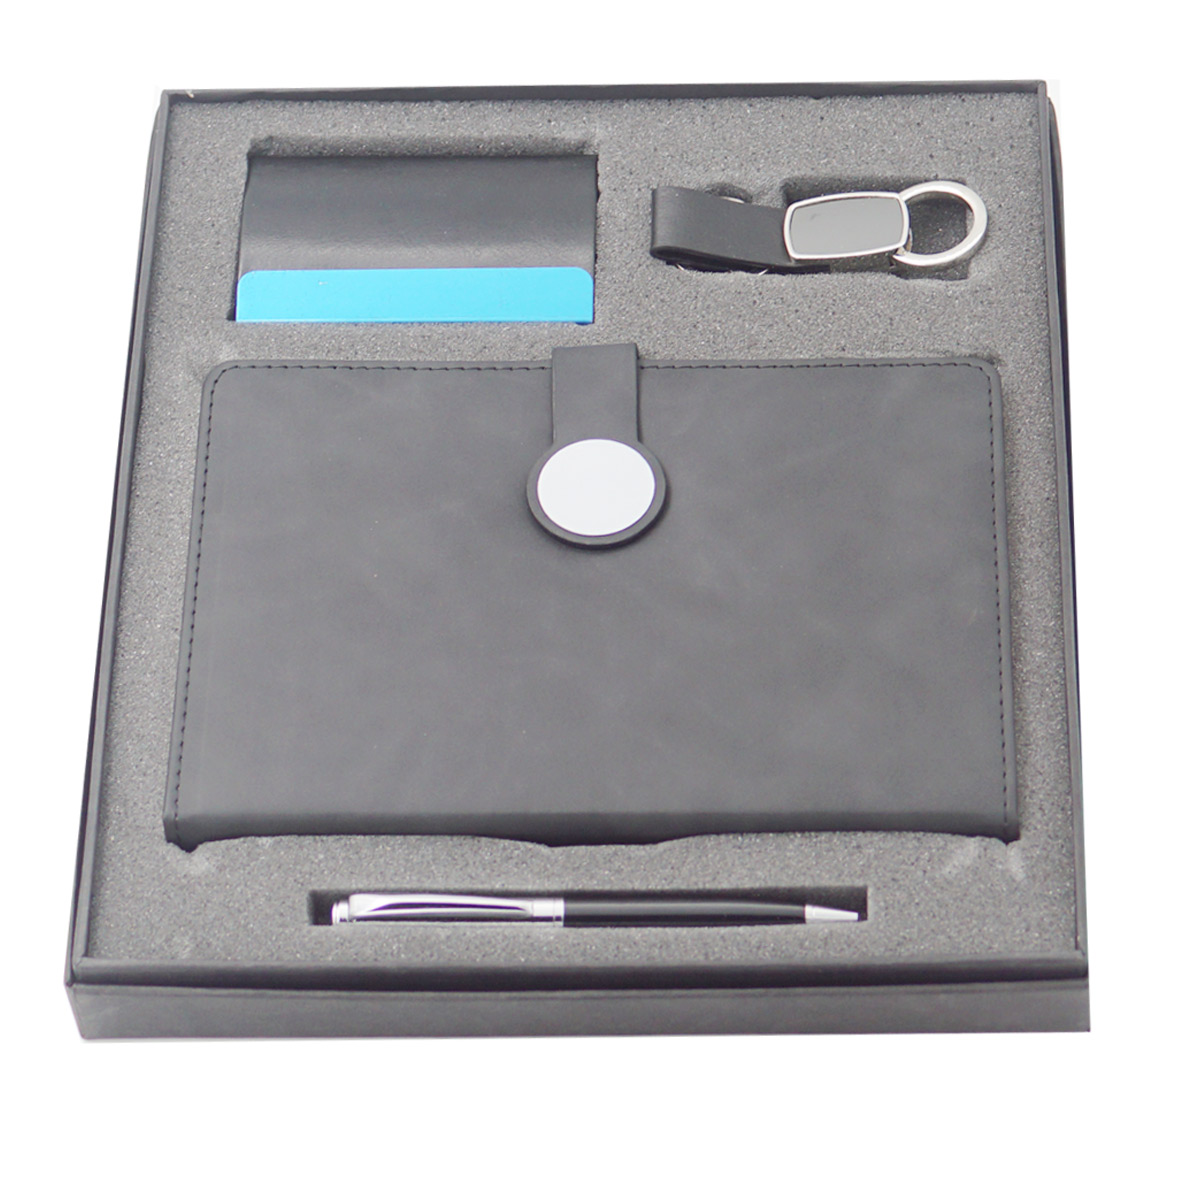 penhouse.in 954 Black  Color A5 Dairy  With Black Cardholder  Leather Keychain And Black Color Cap Silver Twist Type Ball Pen 4 in 1 Set SKU 23623